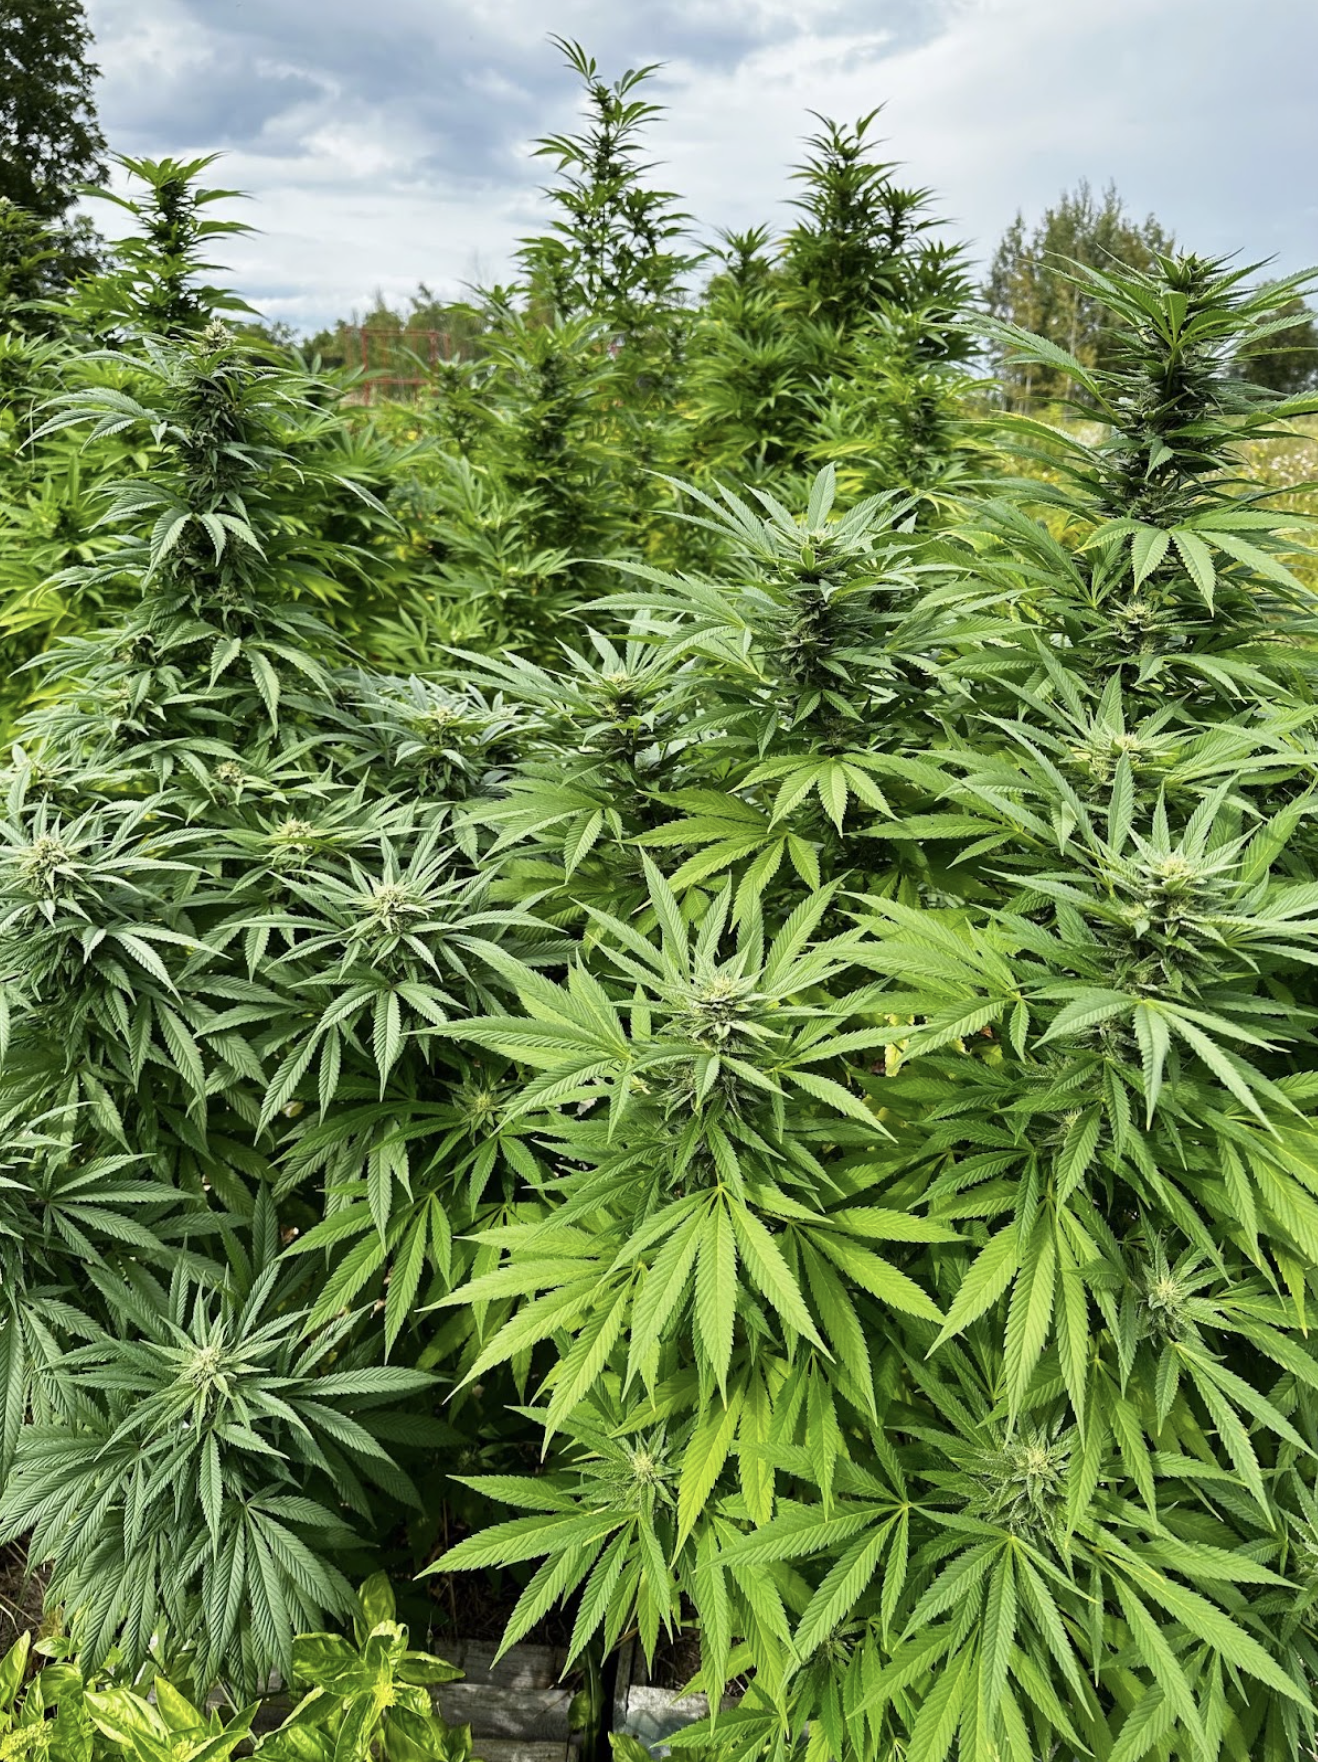 When To Harvest Weed, Urgent Update: Why Waiting Another Week Might Ruin Your Harvest – The Ultimate Timing Guide!